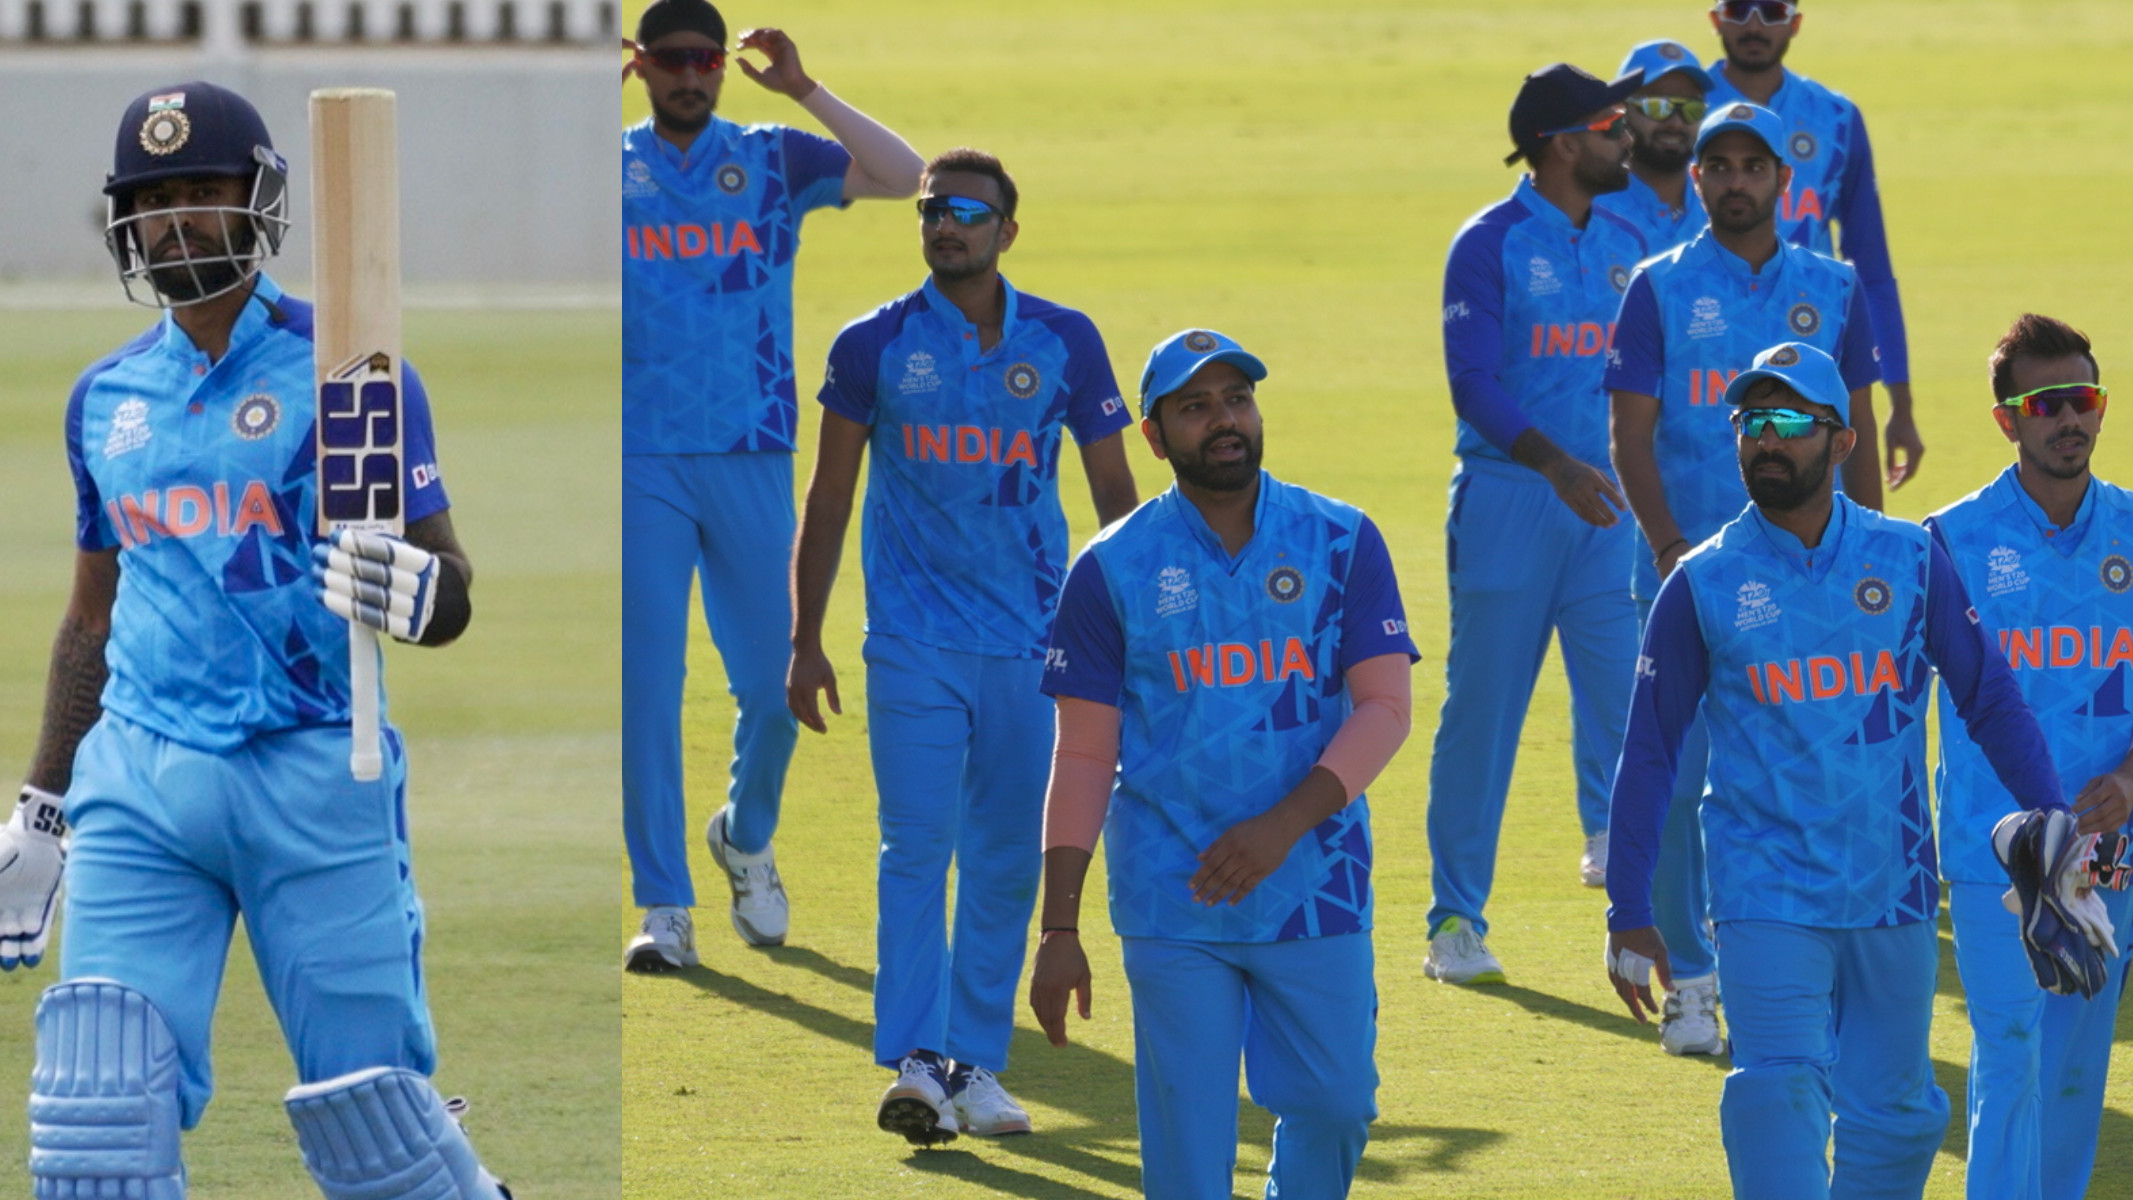 T20 World Cup 2022: India defeats Western Australia by 13 runs in practice match; Suryakumar and Arshdeep shine